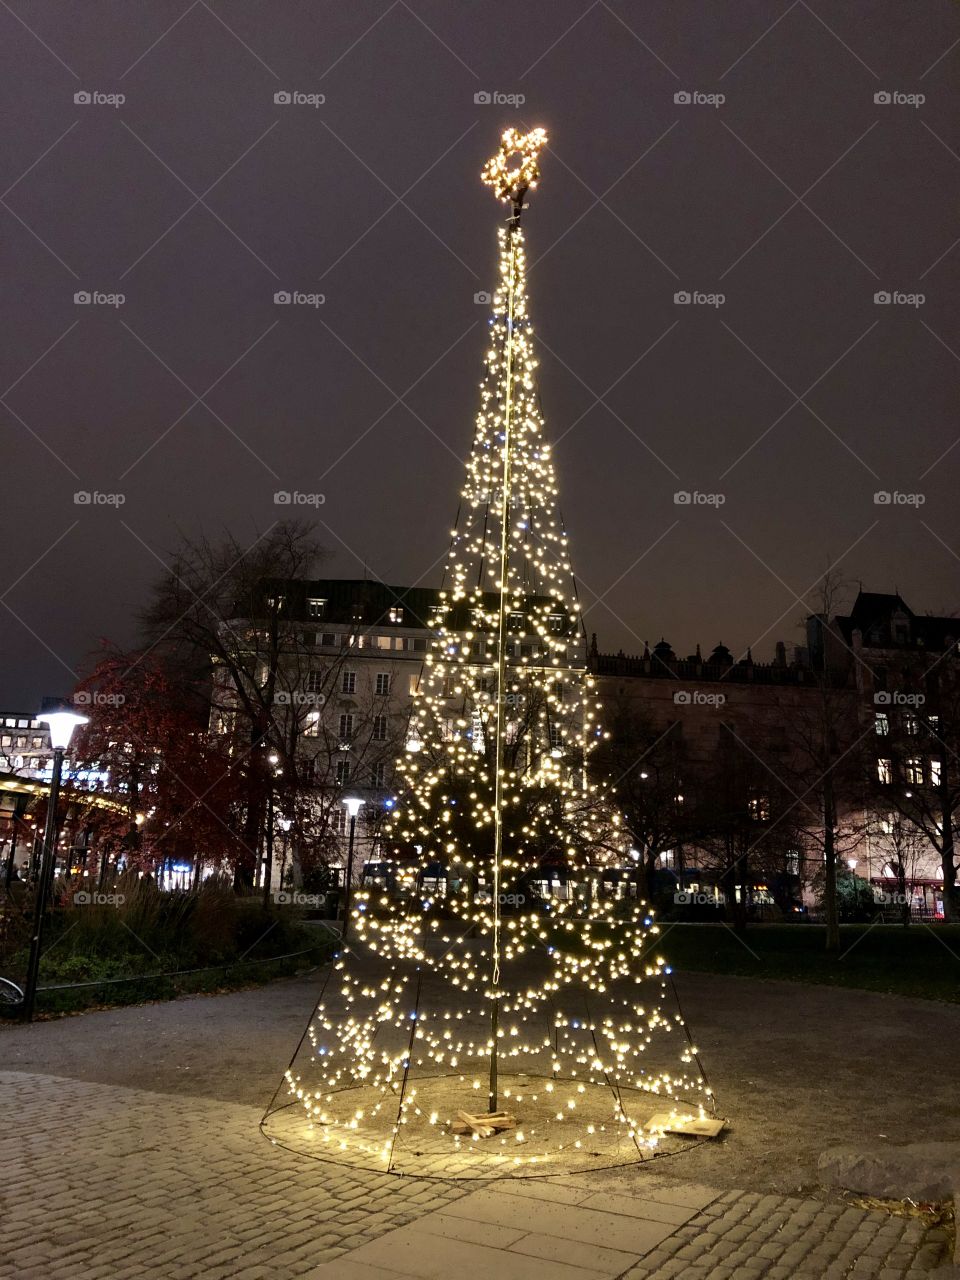 A inspiring view of a lit Christmas tree, perfect for the season.